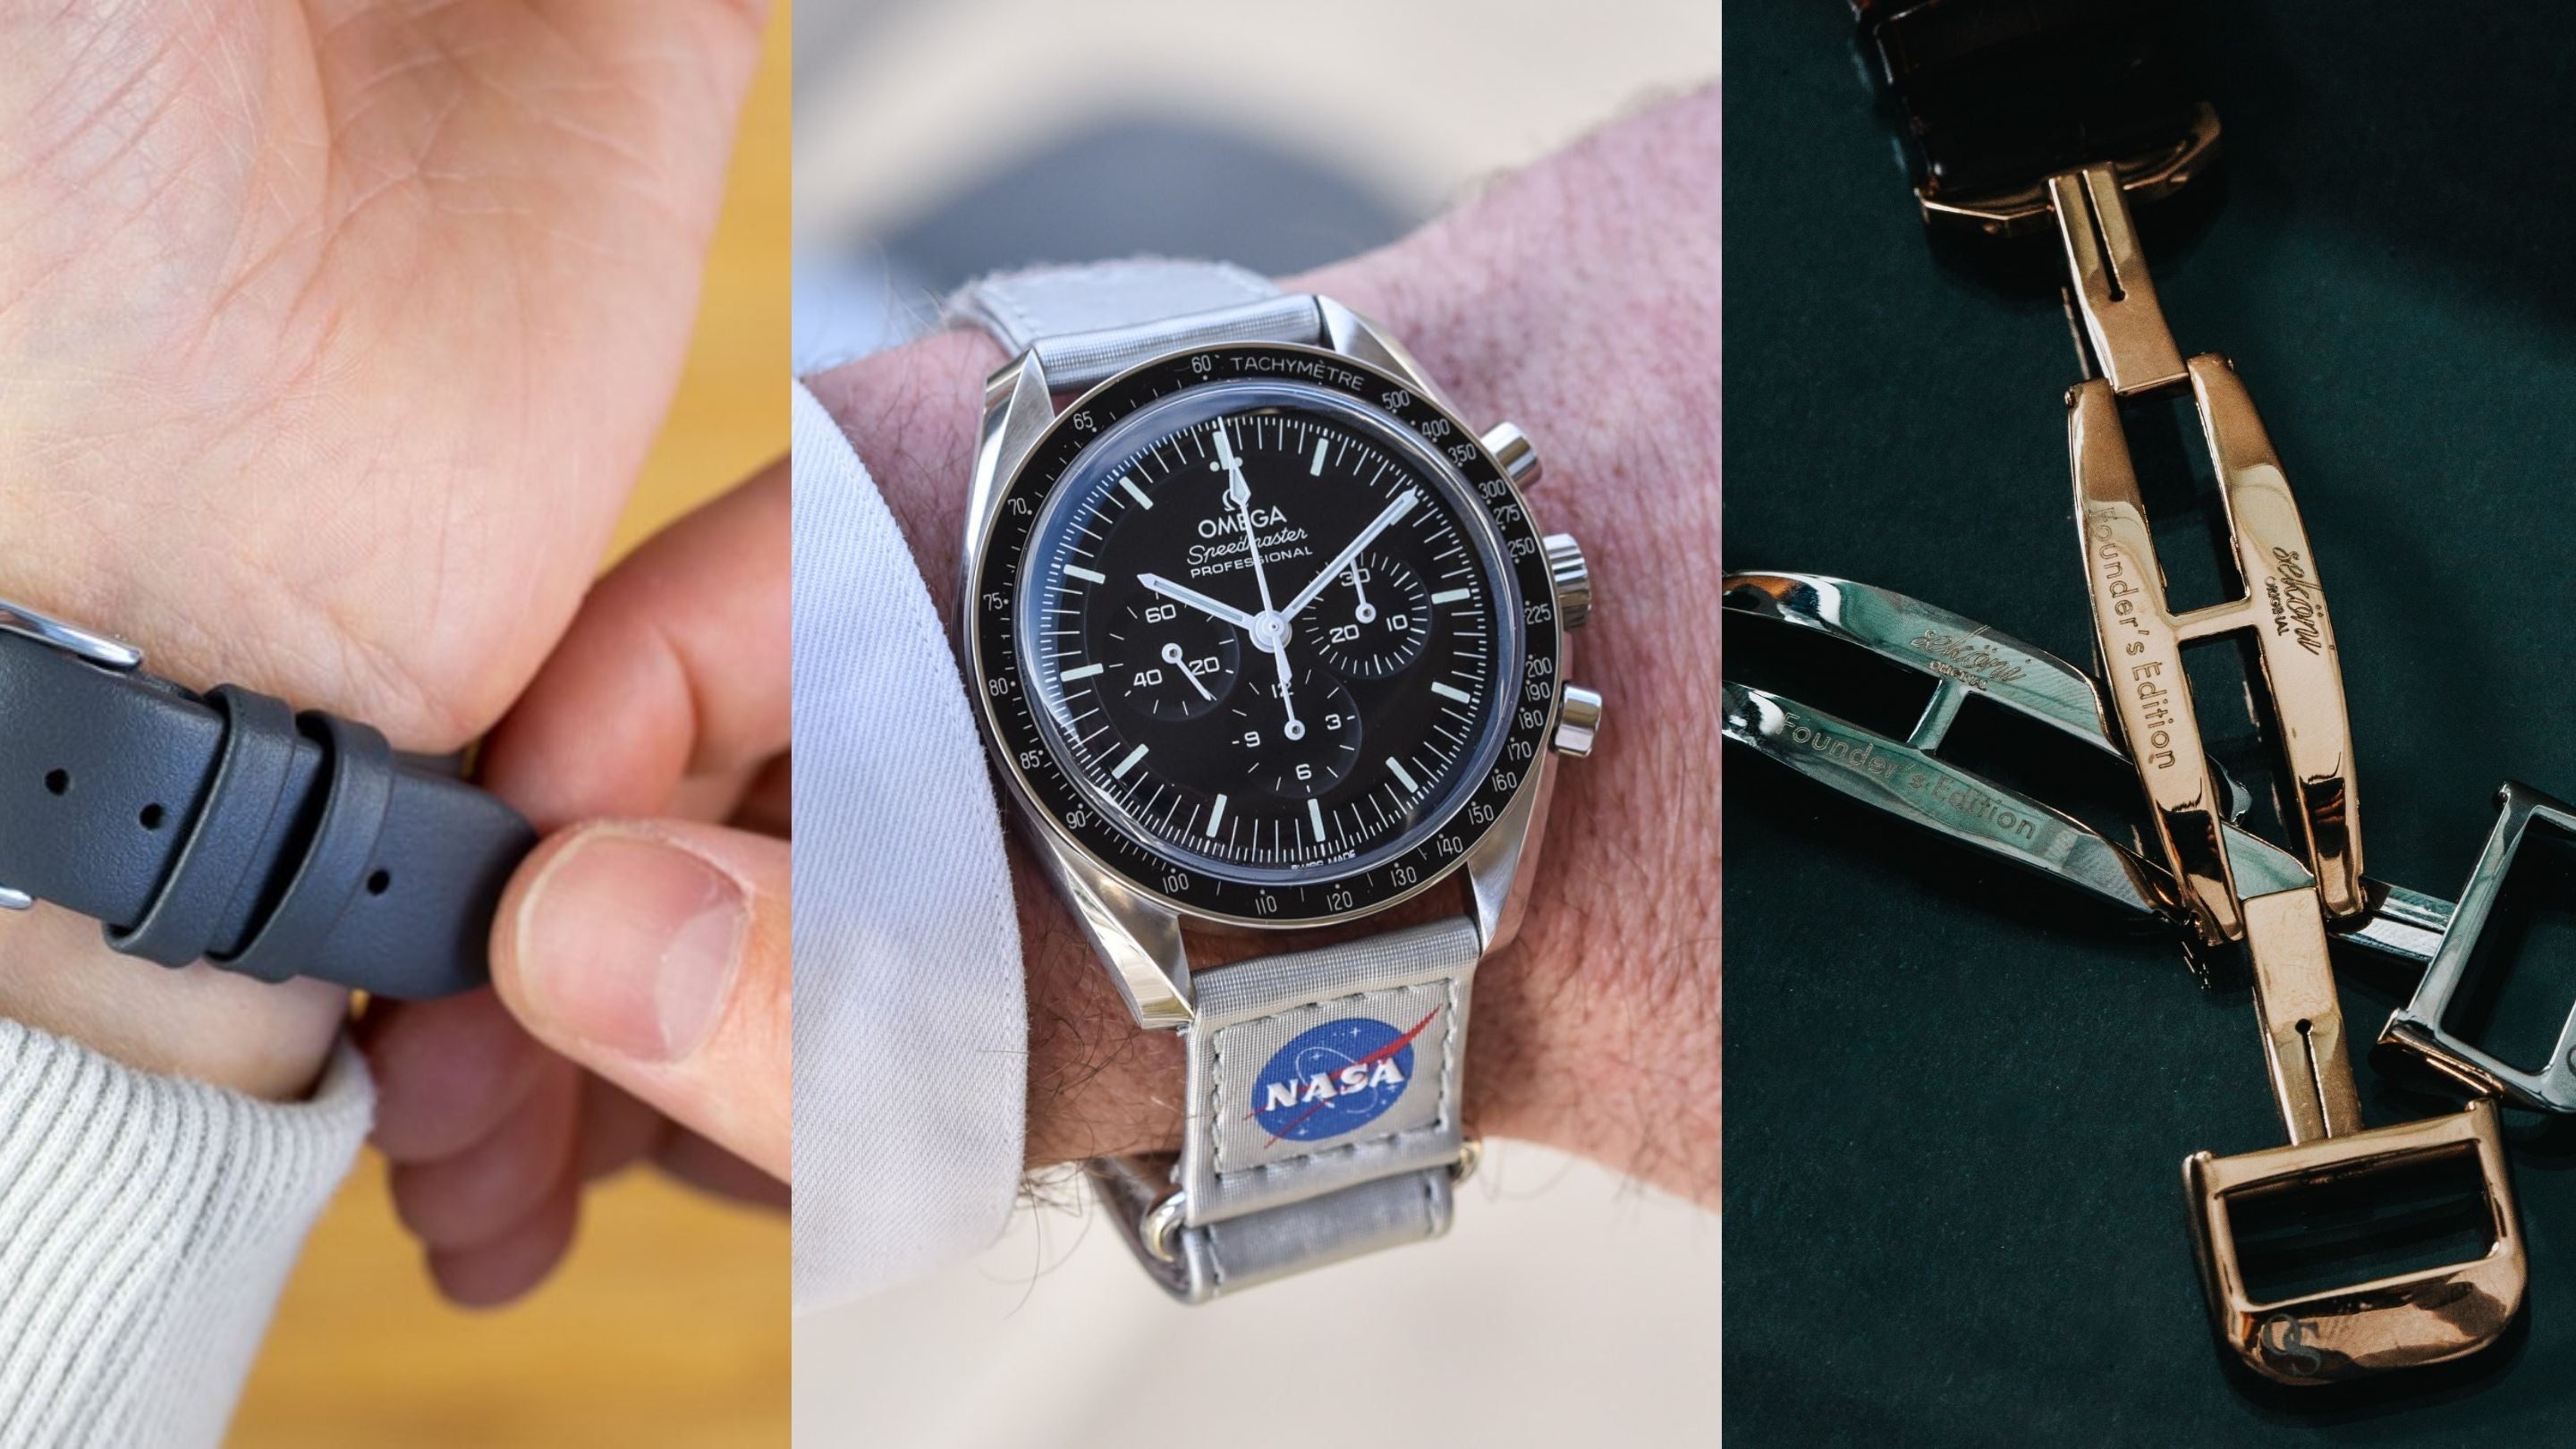 16 Types Of Watch Straps To Dress Up Your Favorite Timepiece